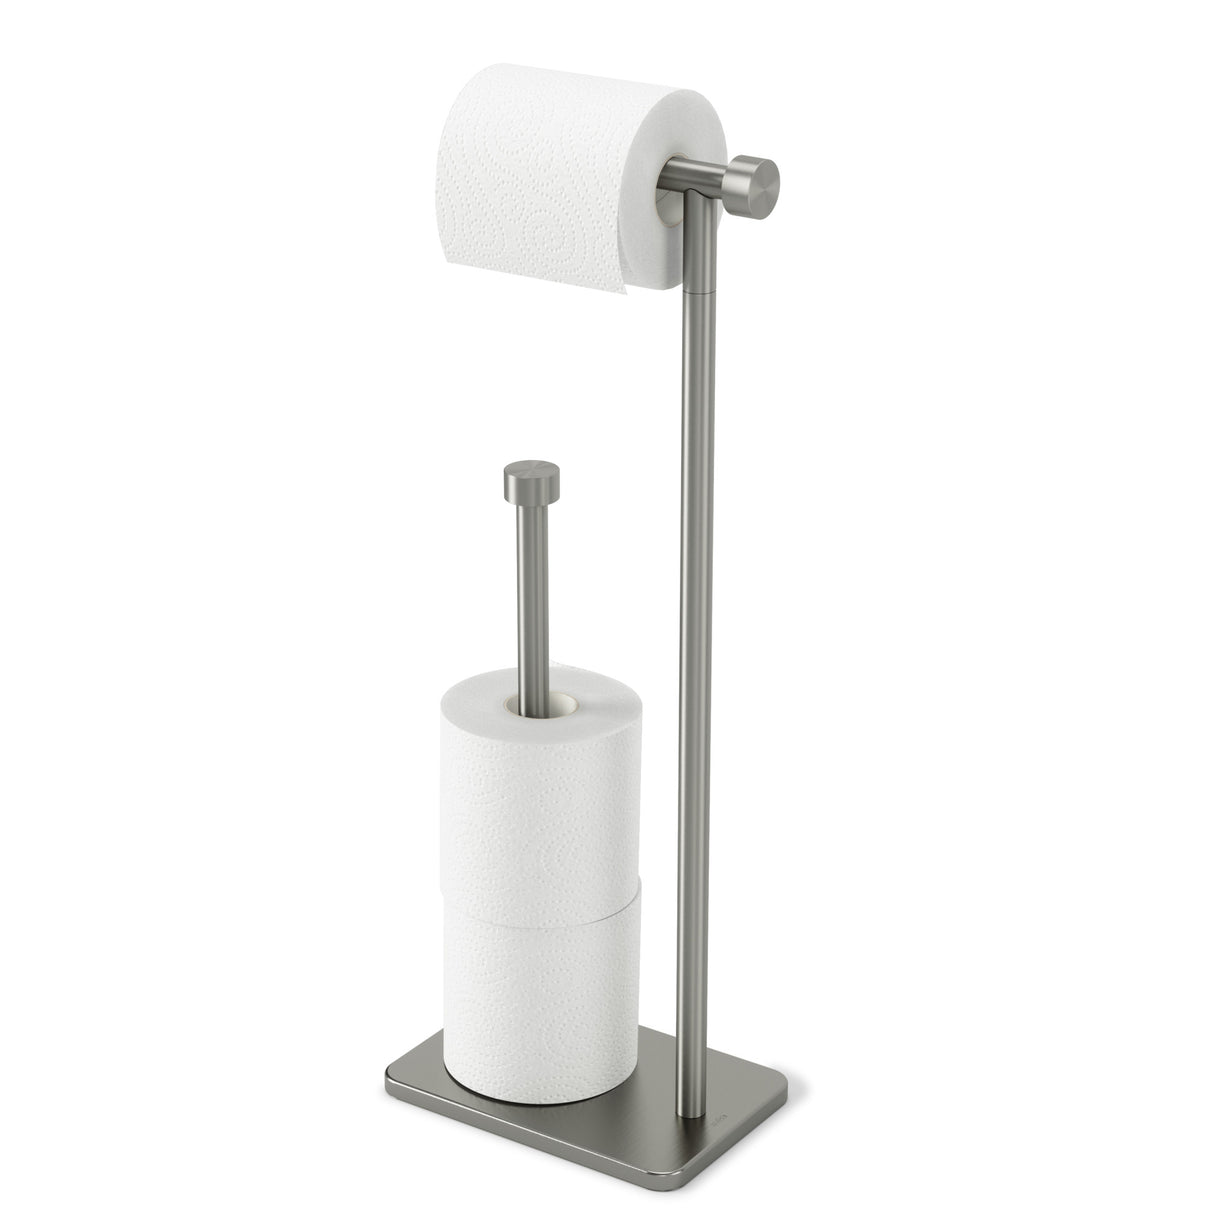 Get Organized with the Teardrop Toilet Paper Stand